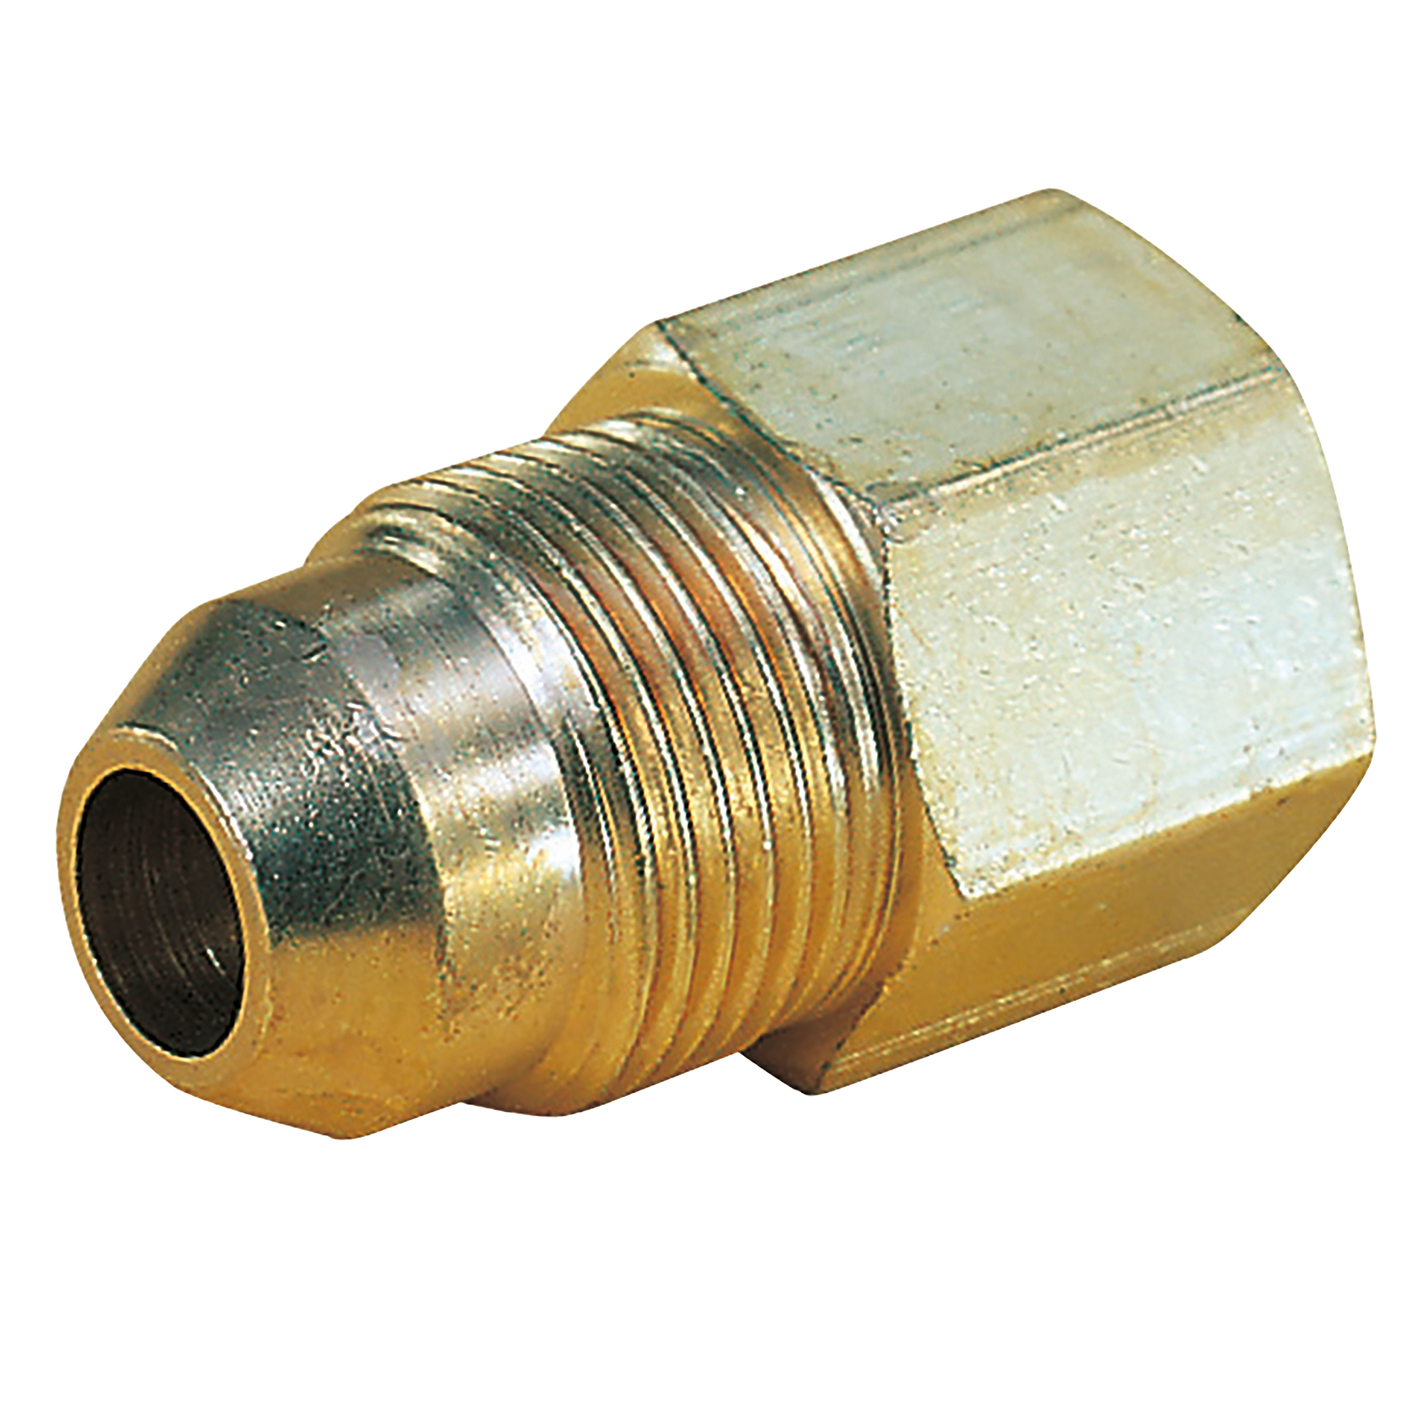 16 x 10mm OD Reducing Connector